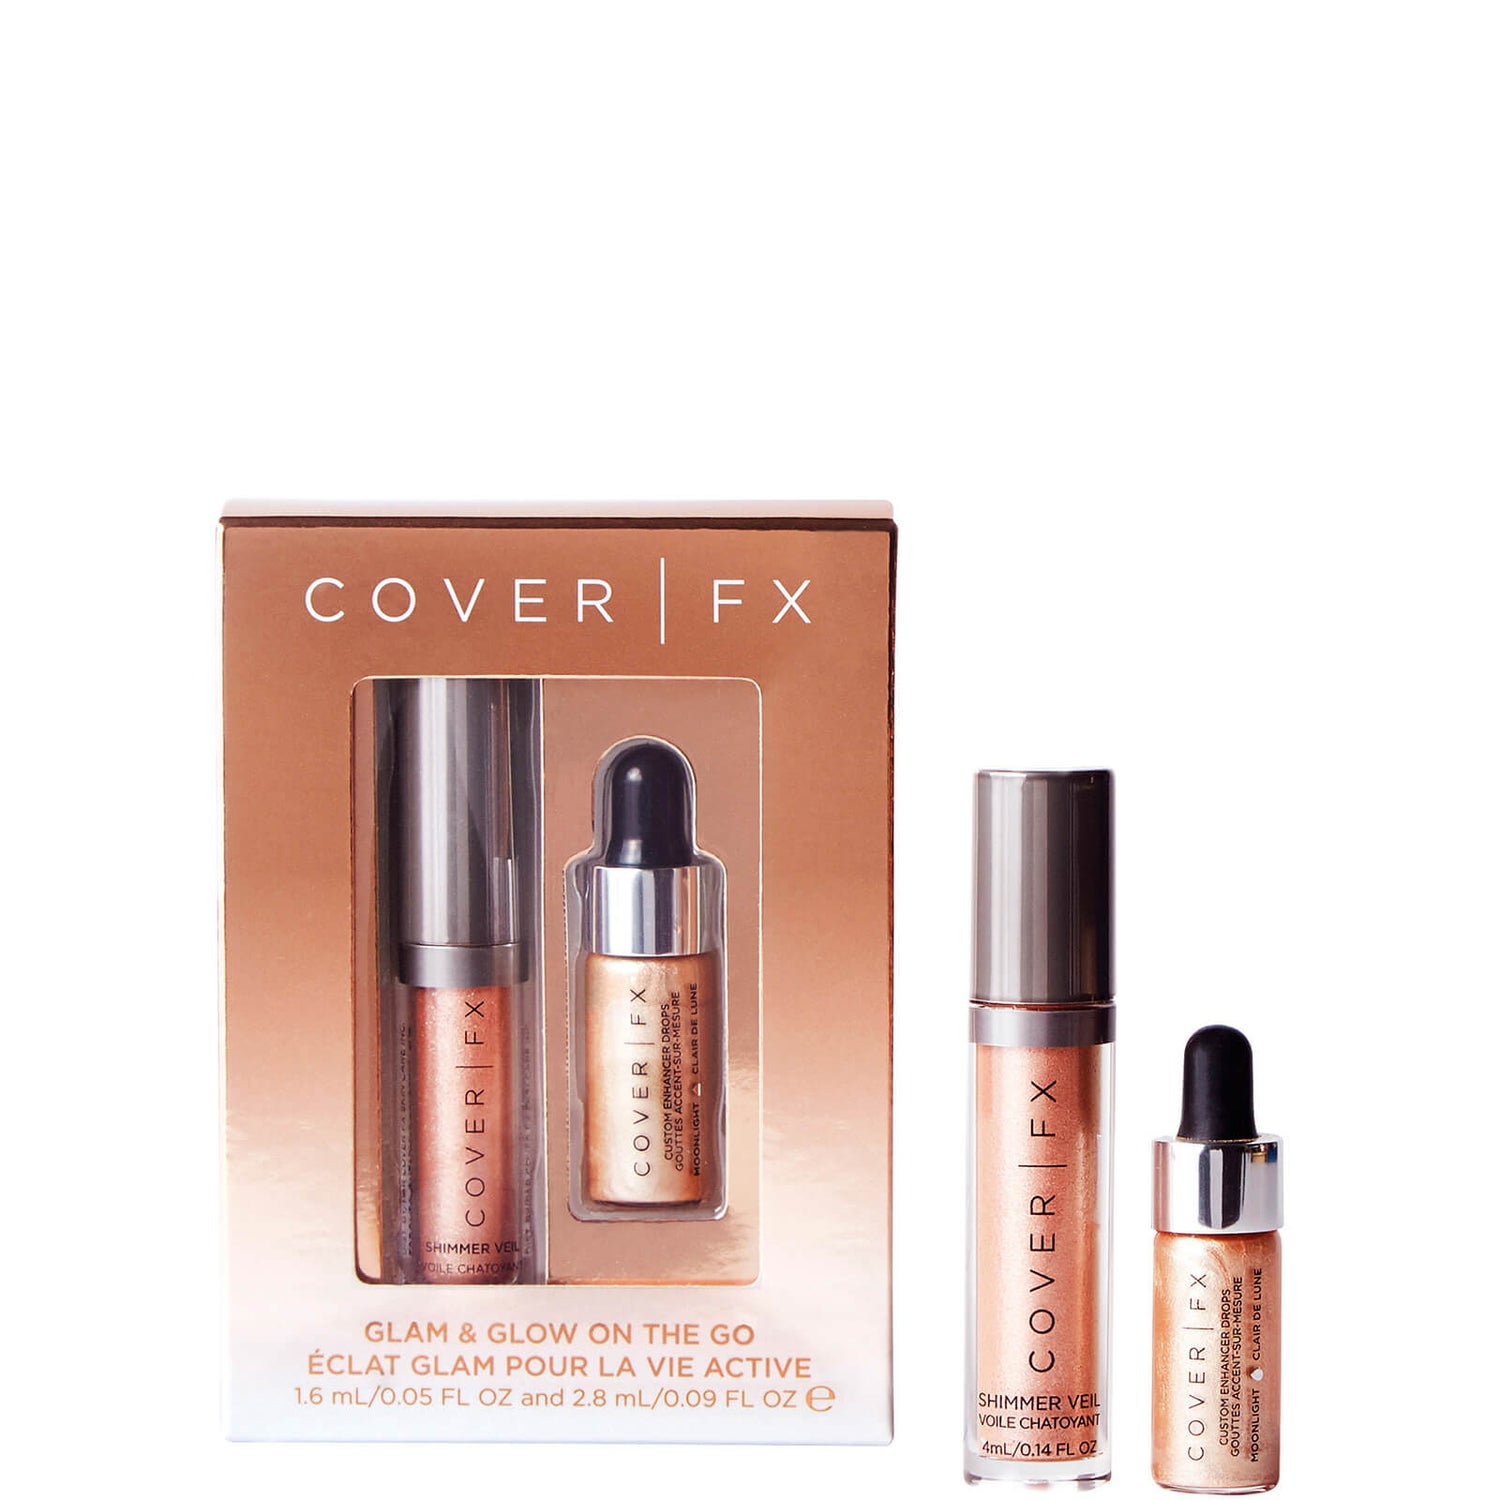 Cover FX Glam & Glow on the Go